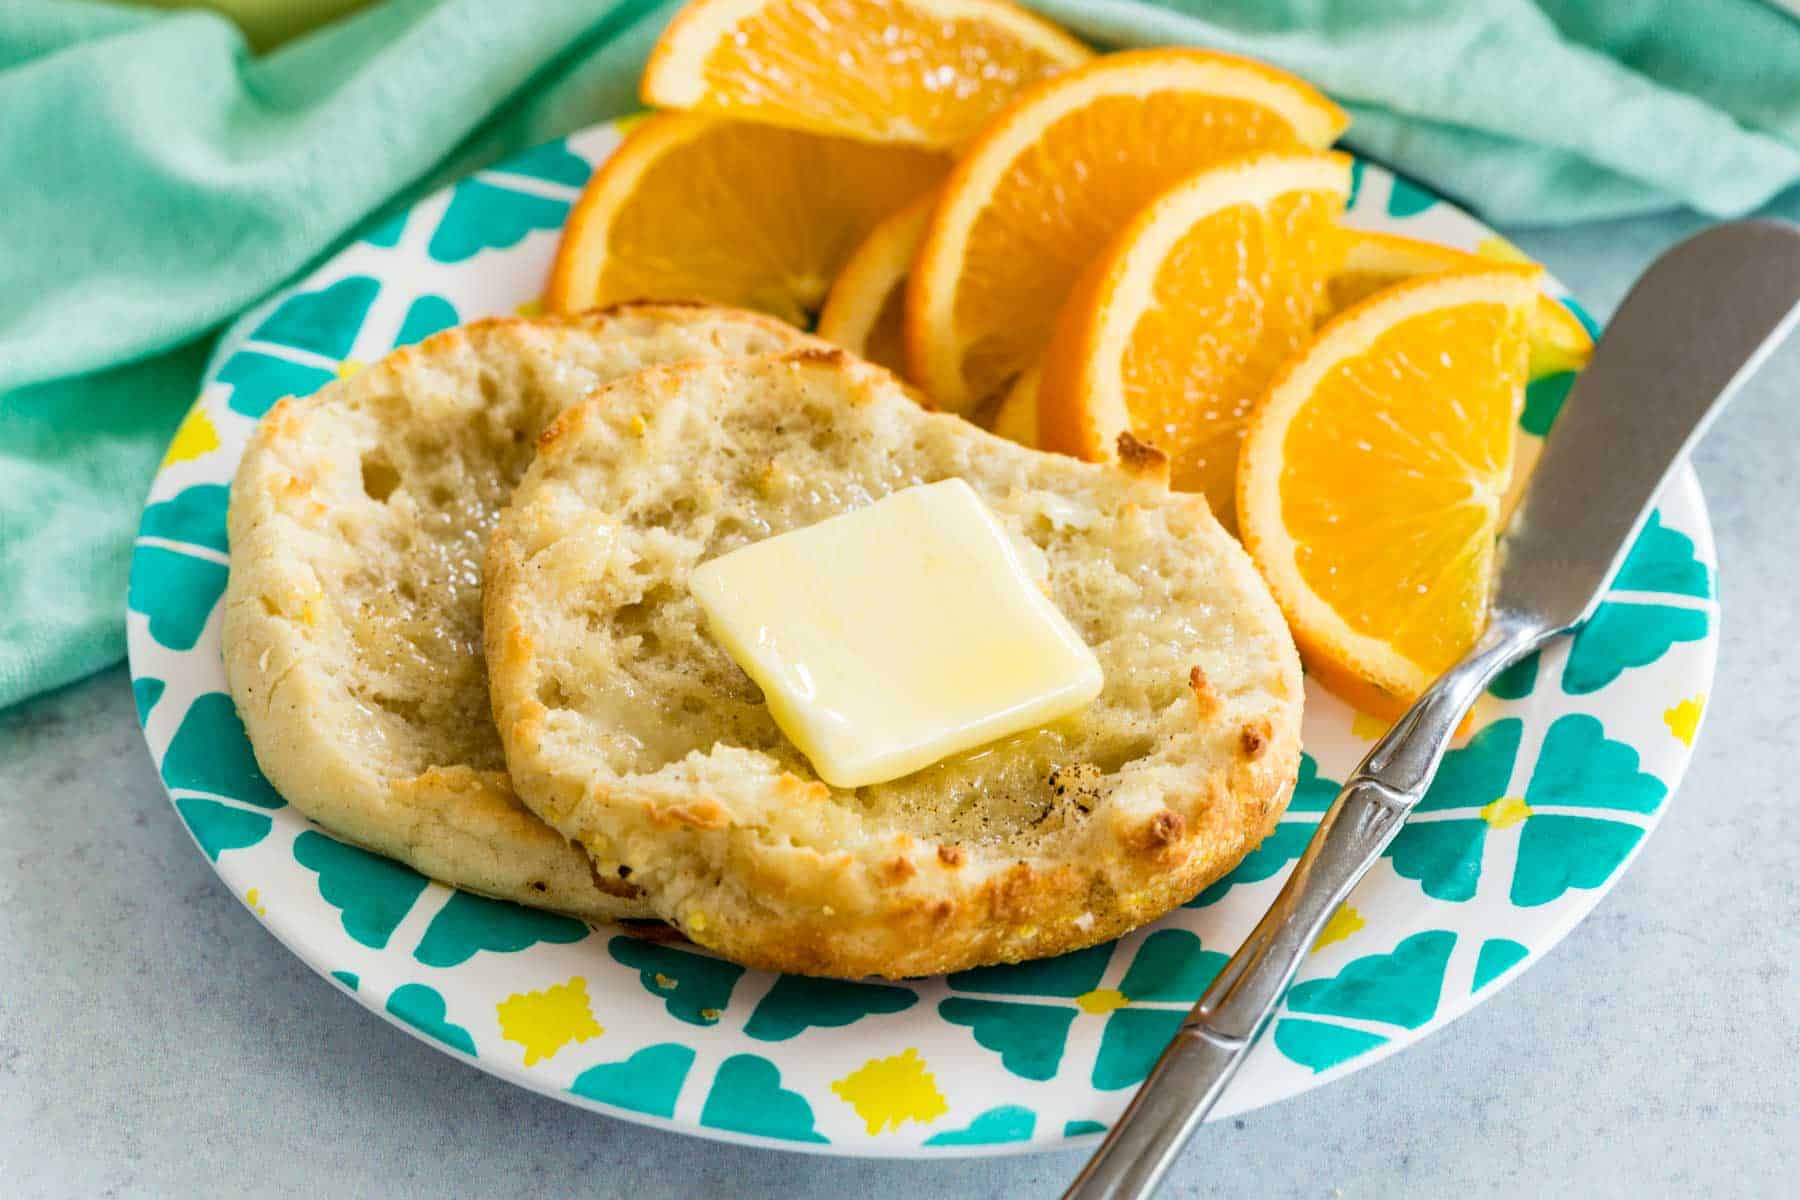 English muffins with a pat of butter in a plate with orange slices.